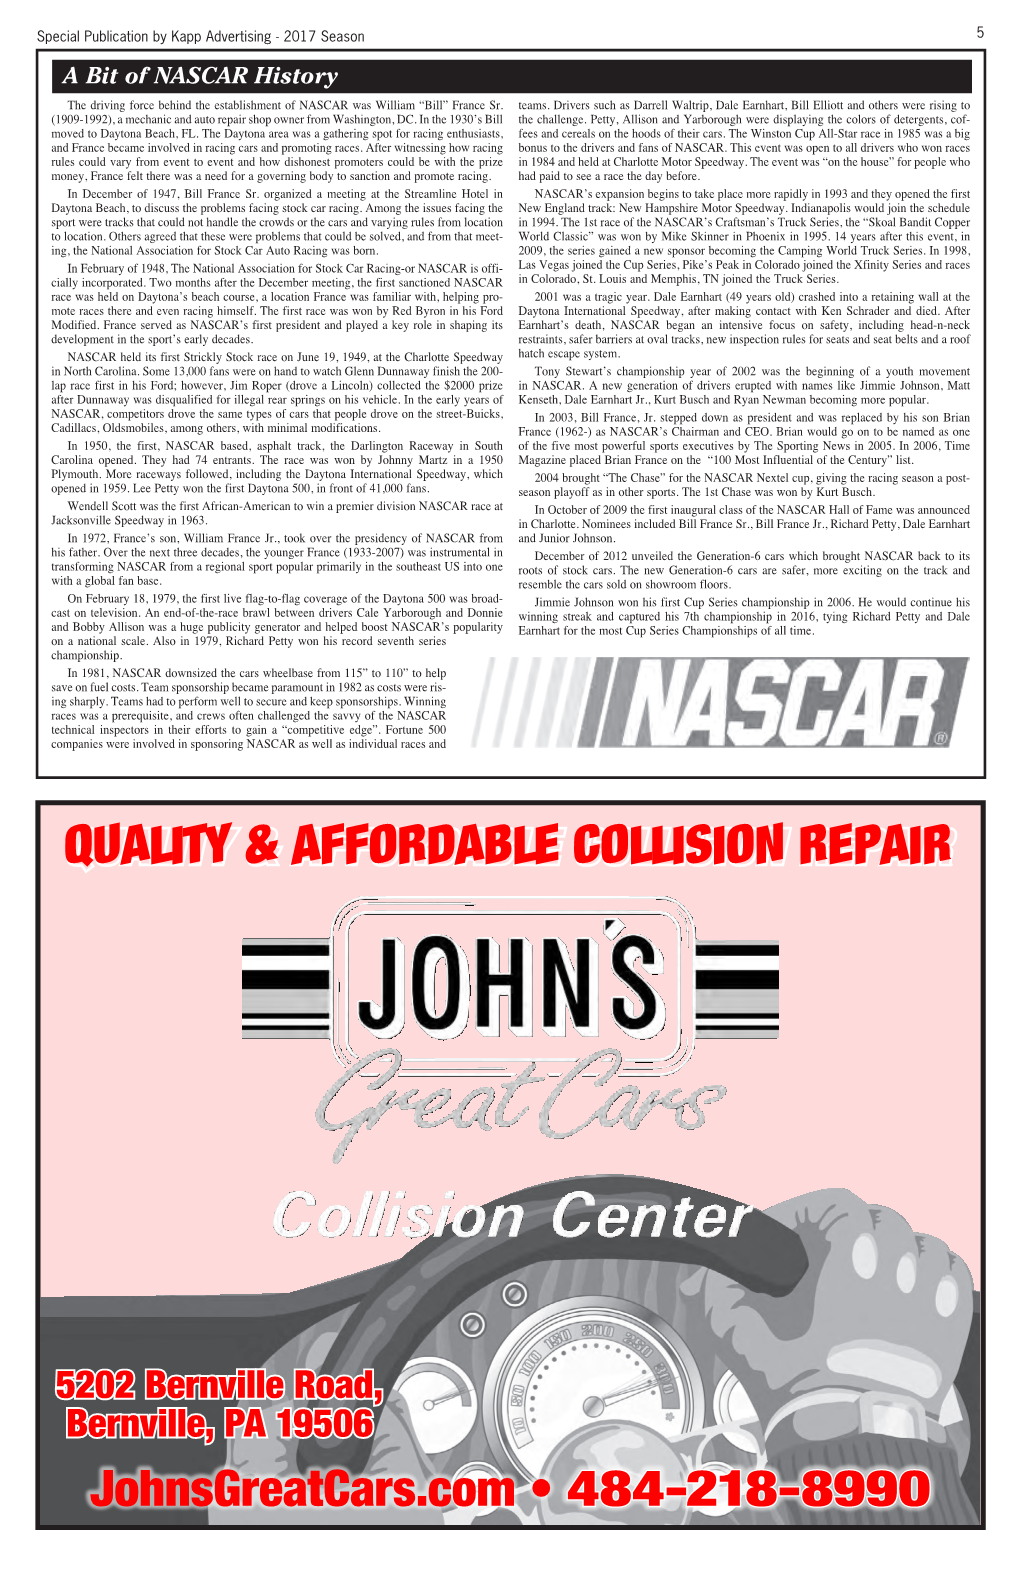 Quality & Affordable Collision Repair